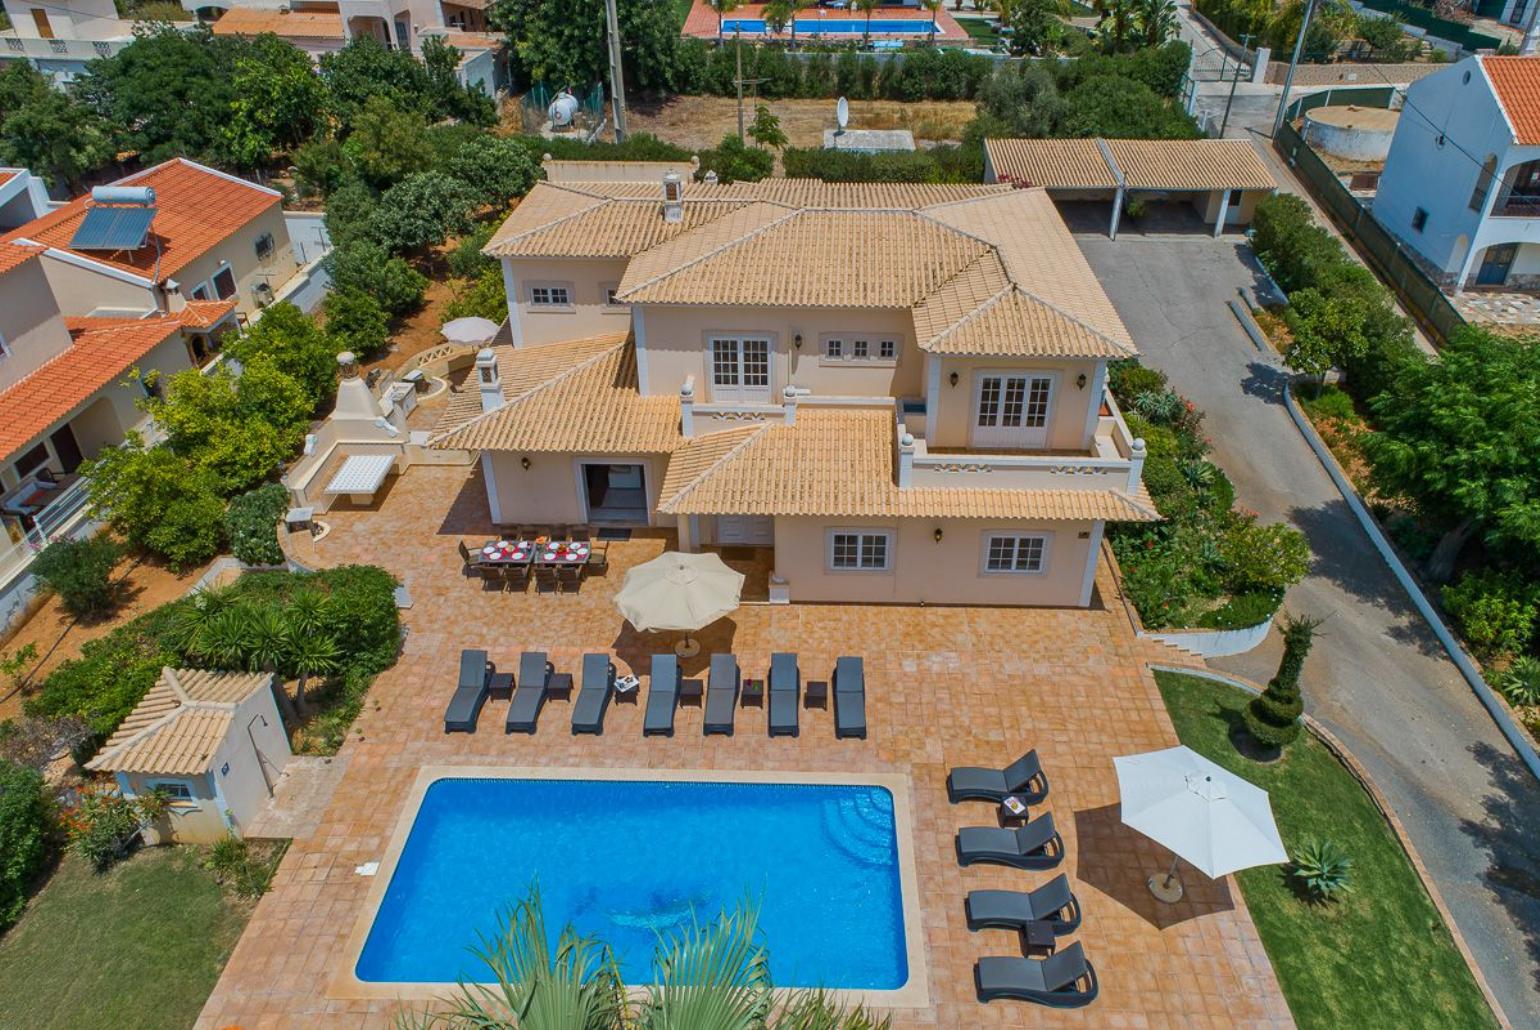 Aerial view of the villa.